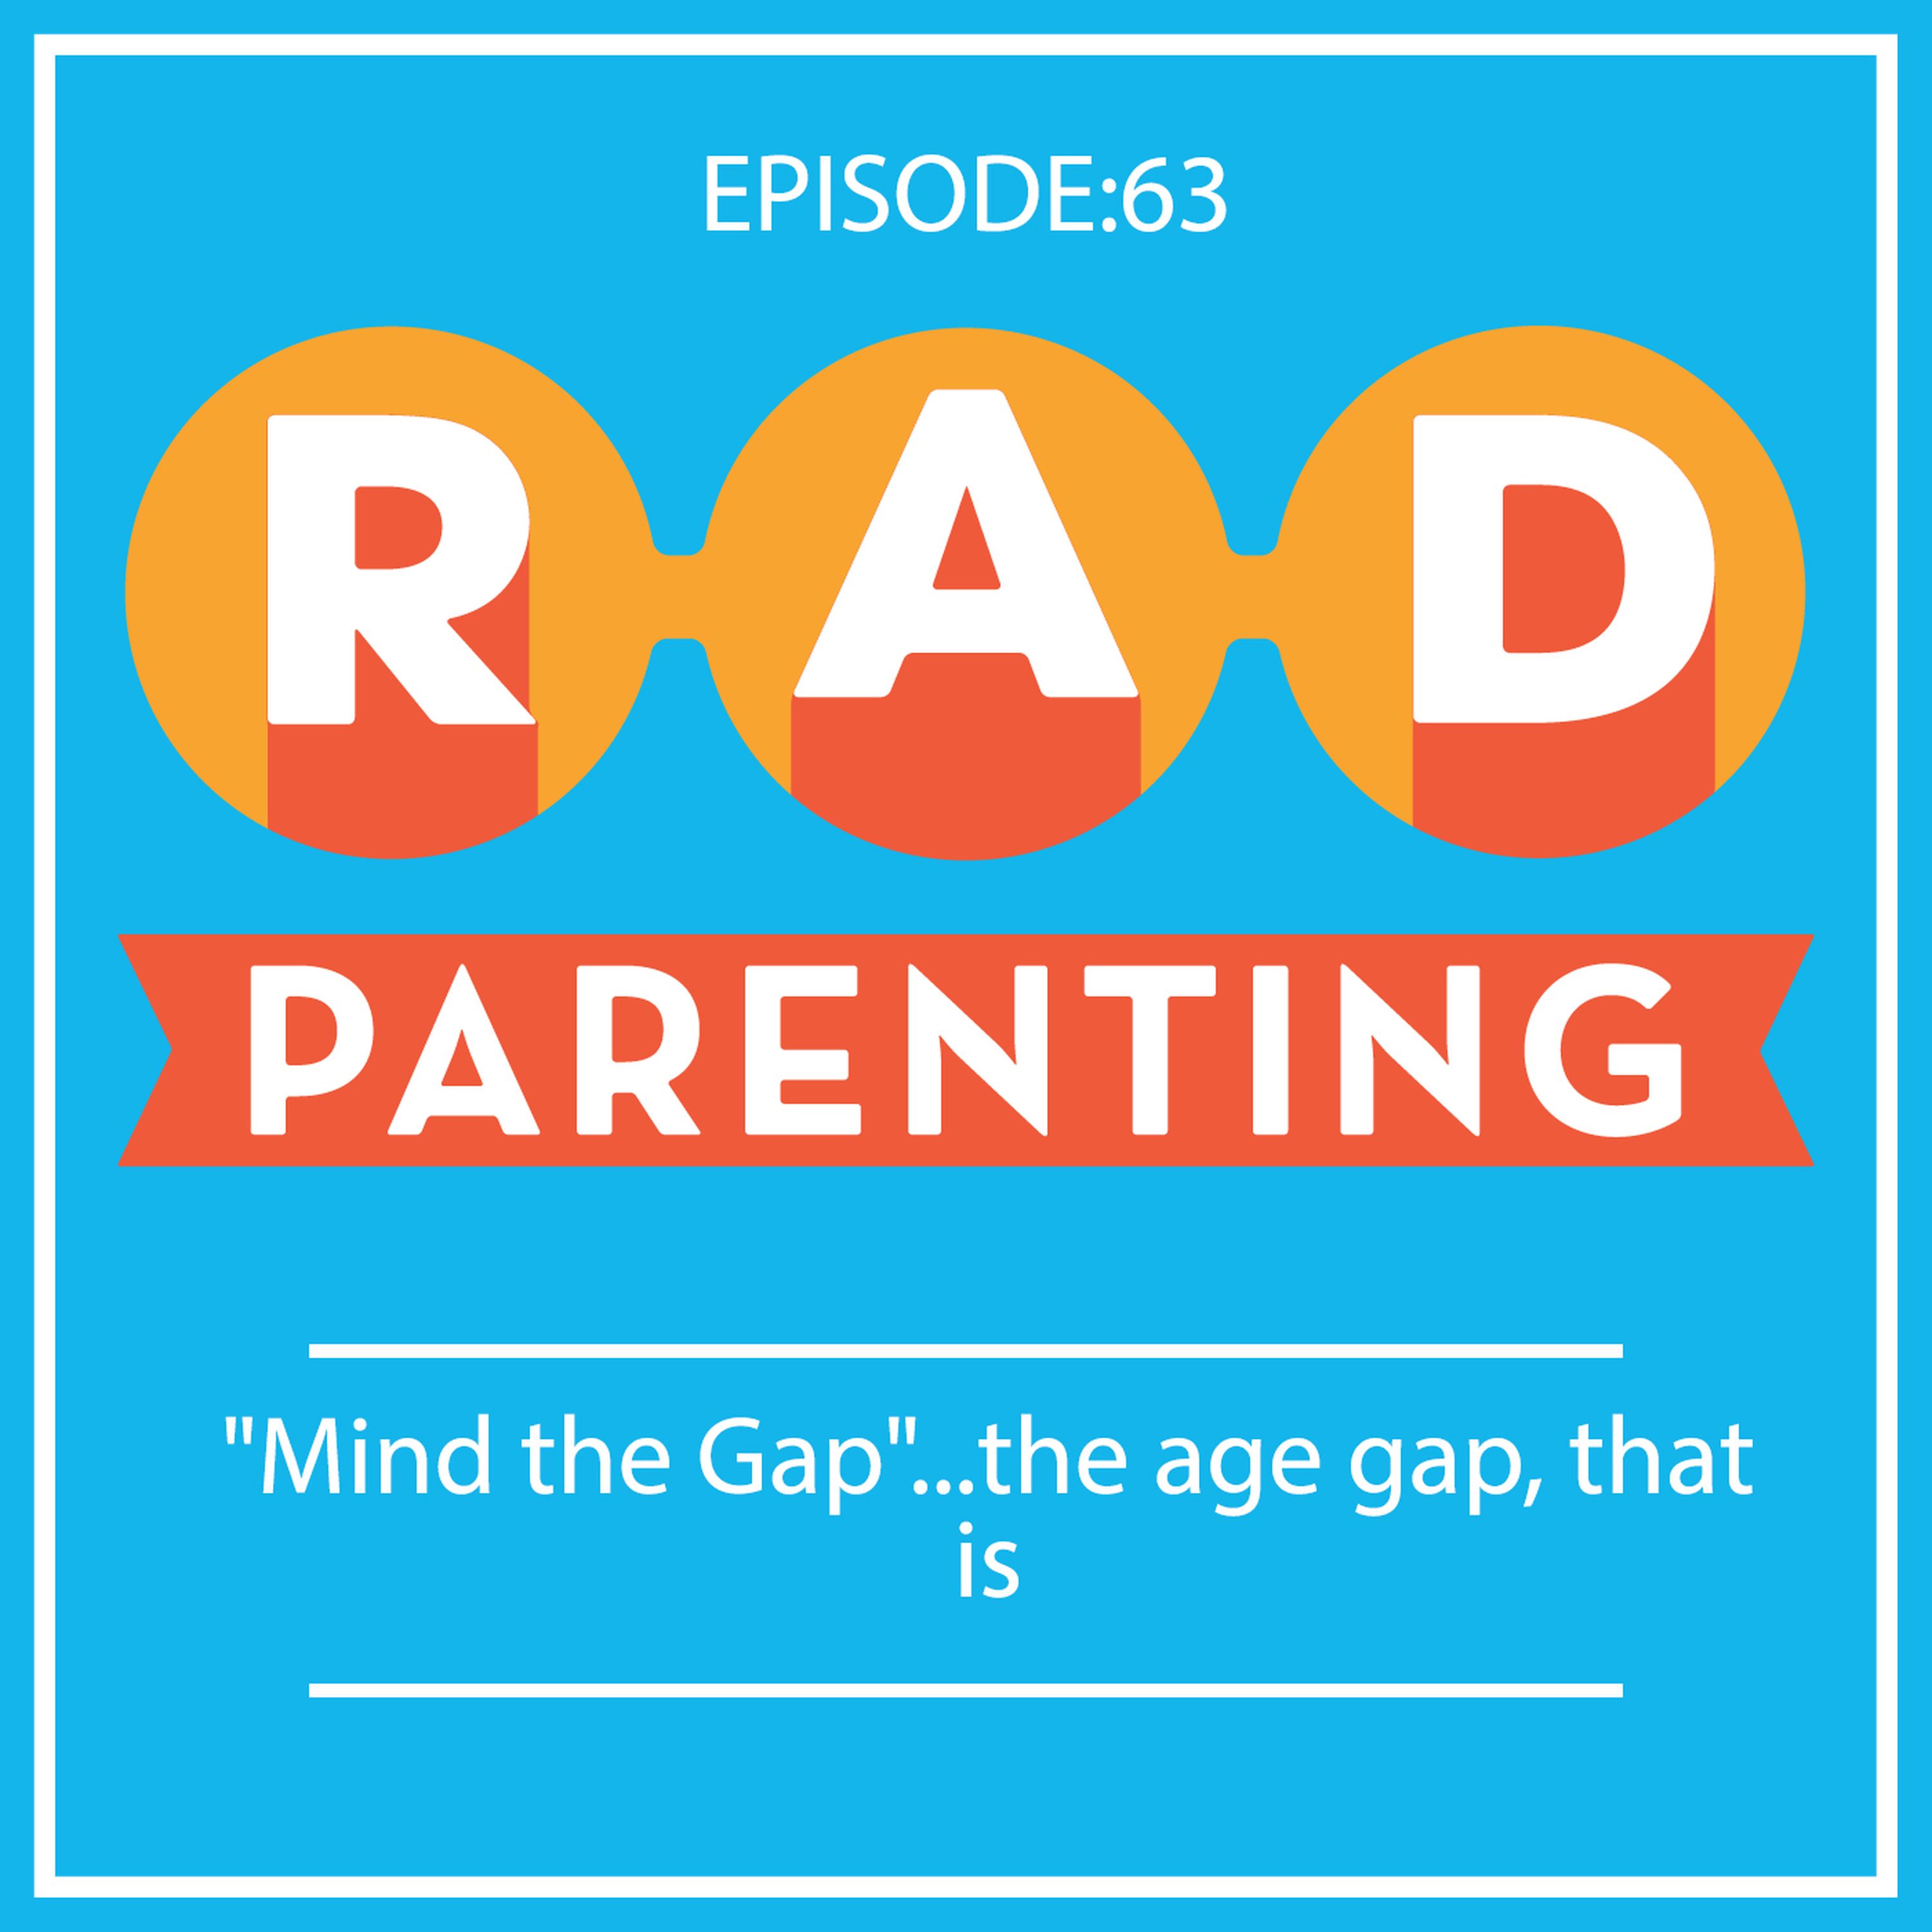 ”Mind the Gap”...the age gap, that is